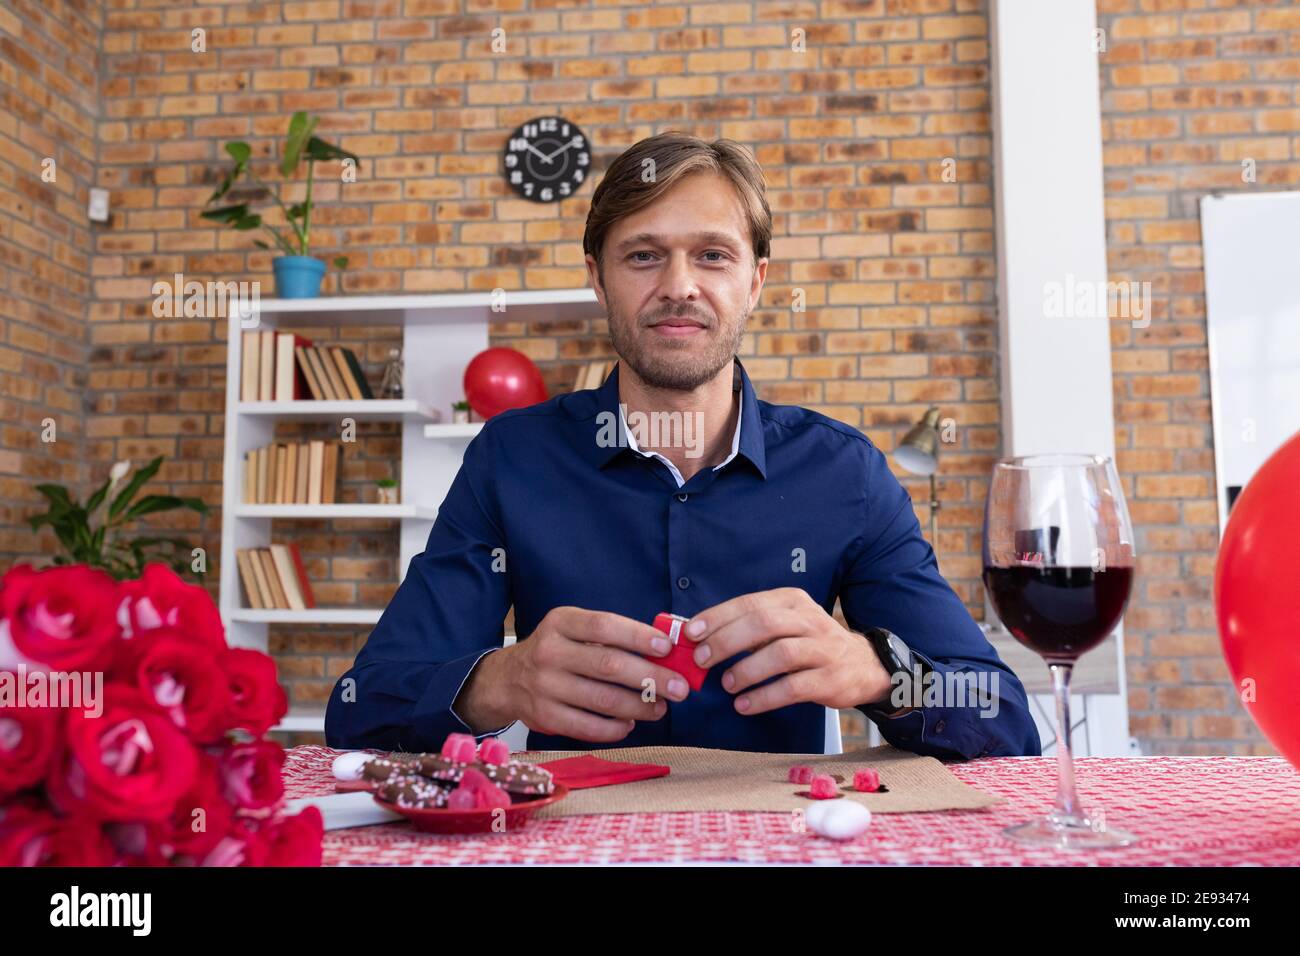 Caucasian man making video call opening a small gift box and smiling Stock Photo